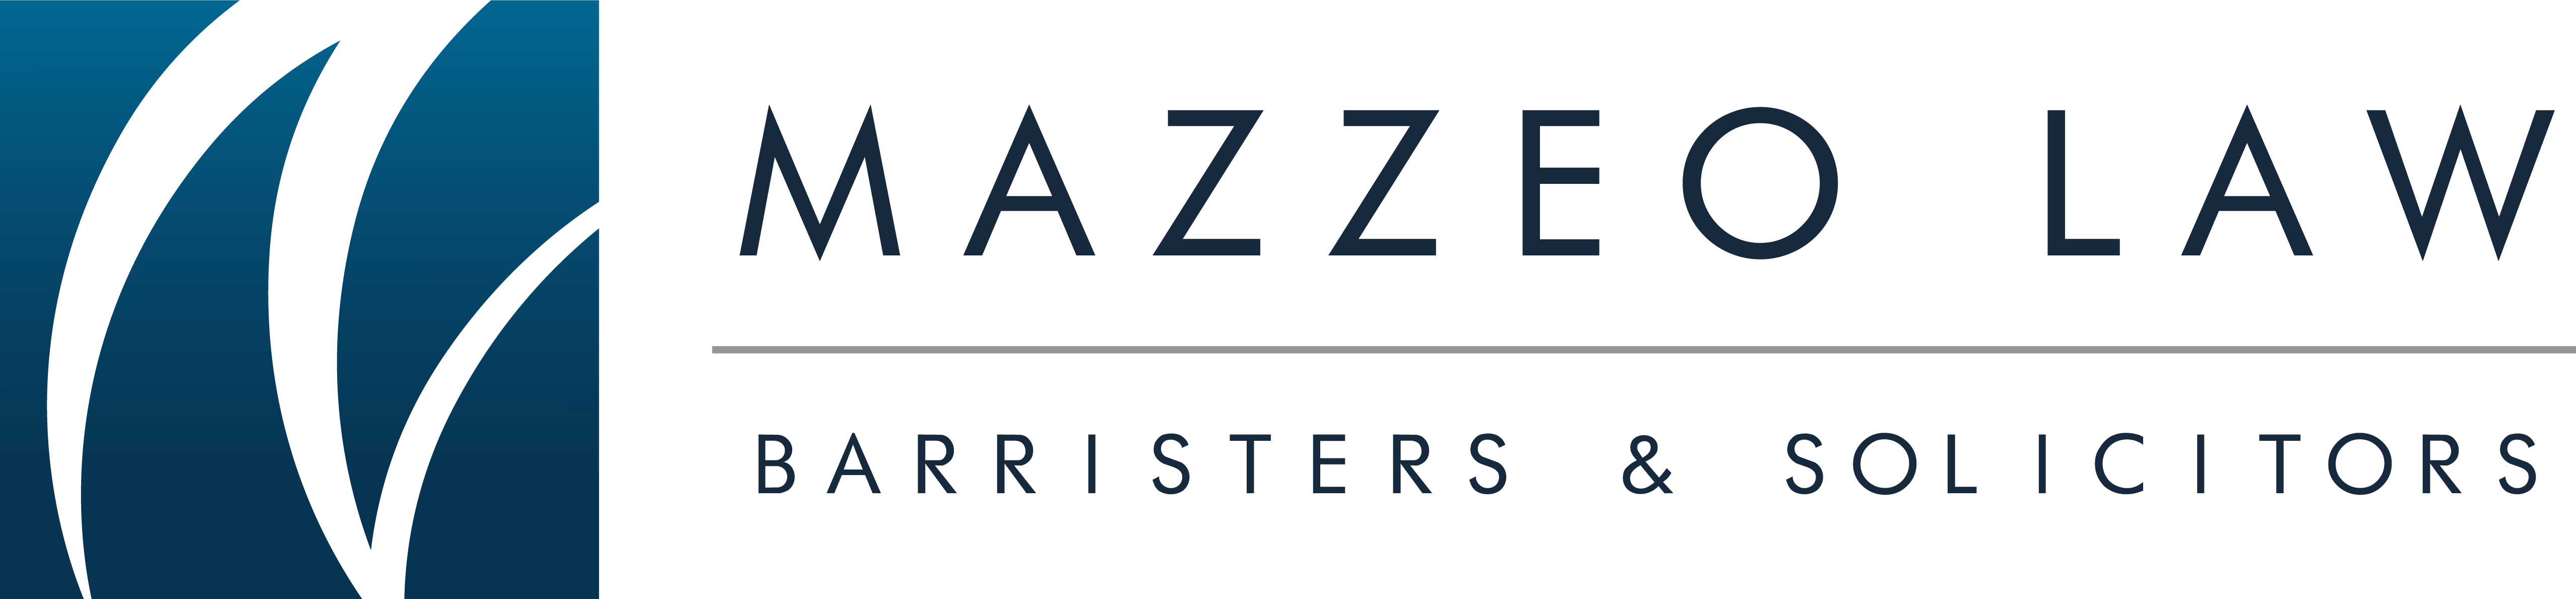 Mazzeo Law Barristers & Solicitors